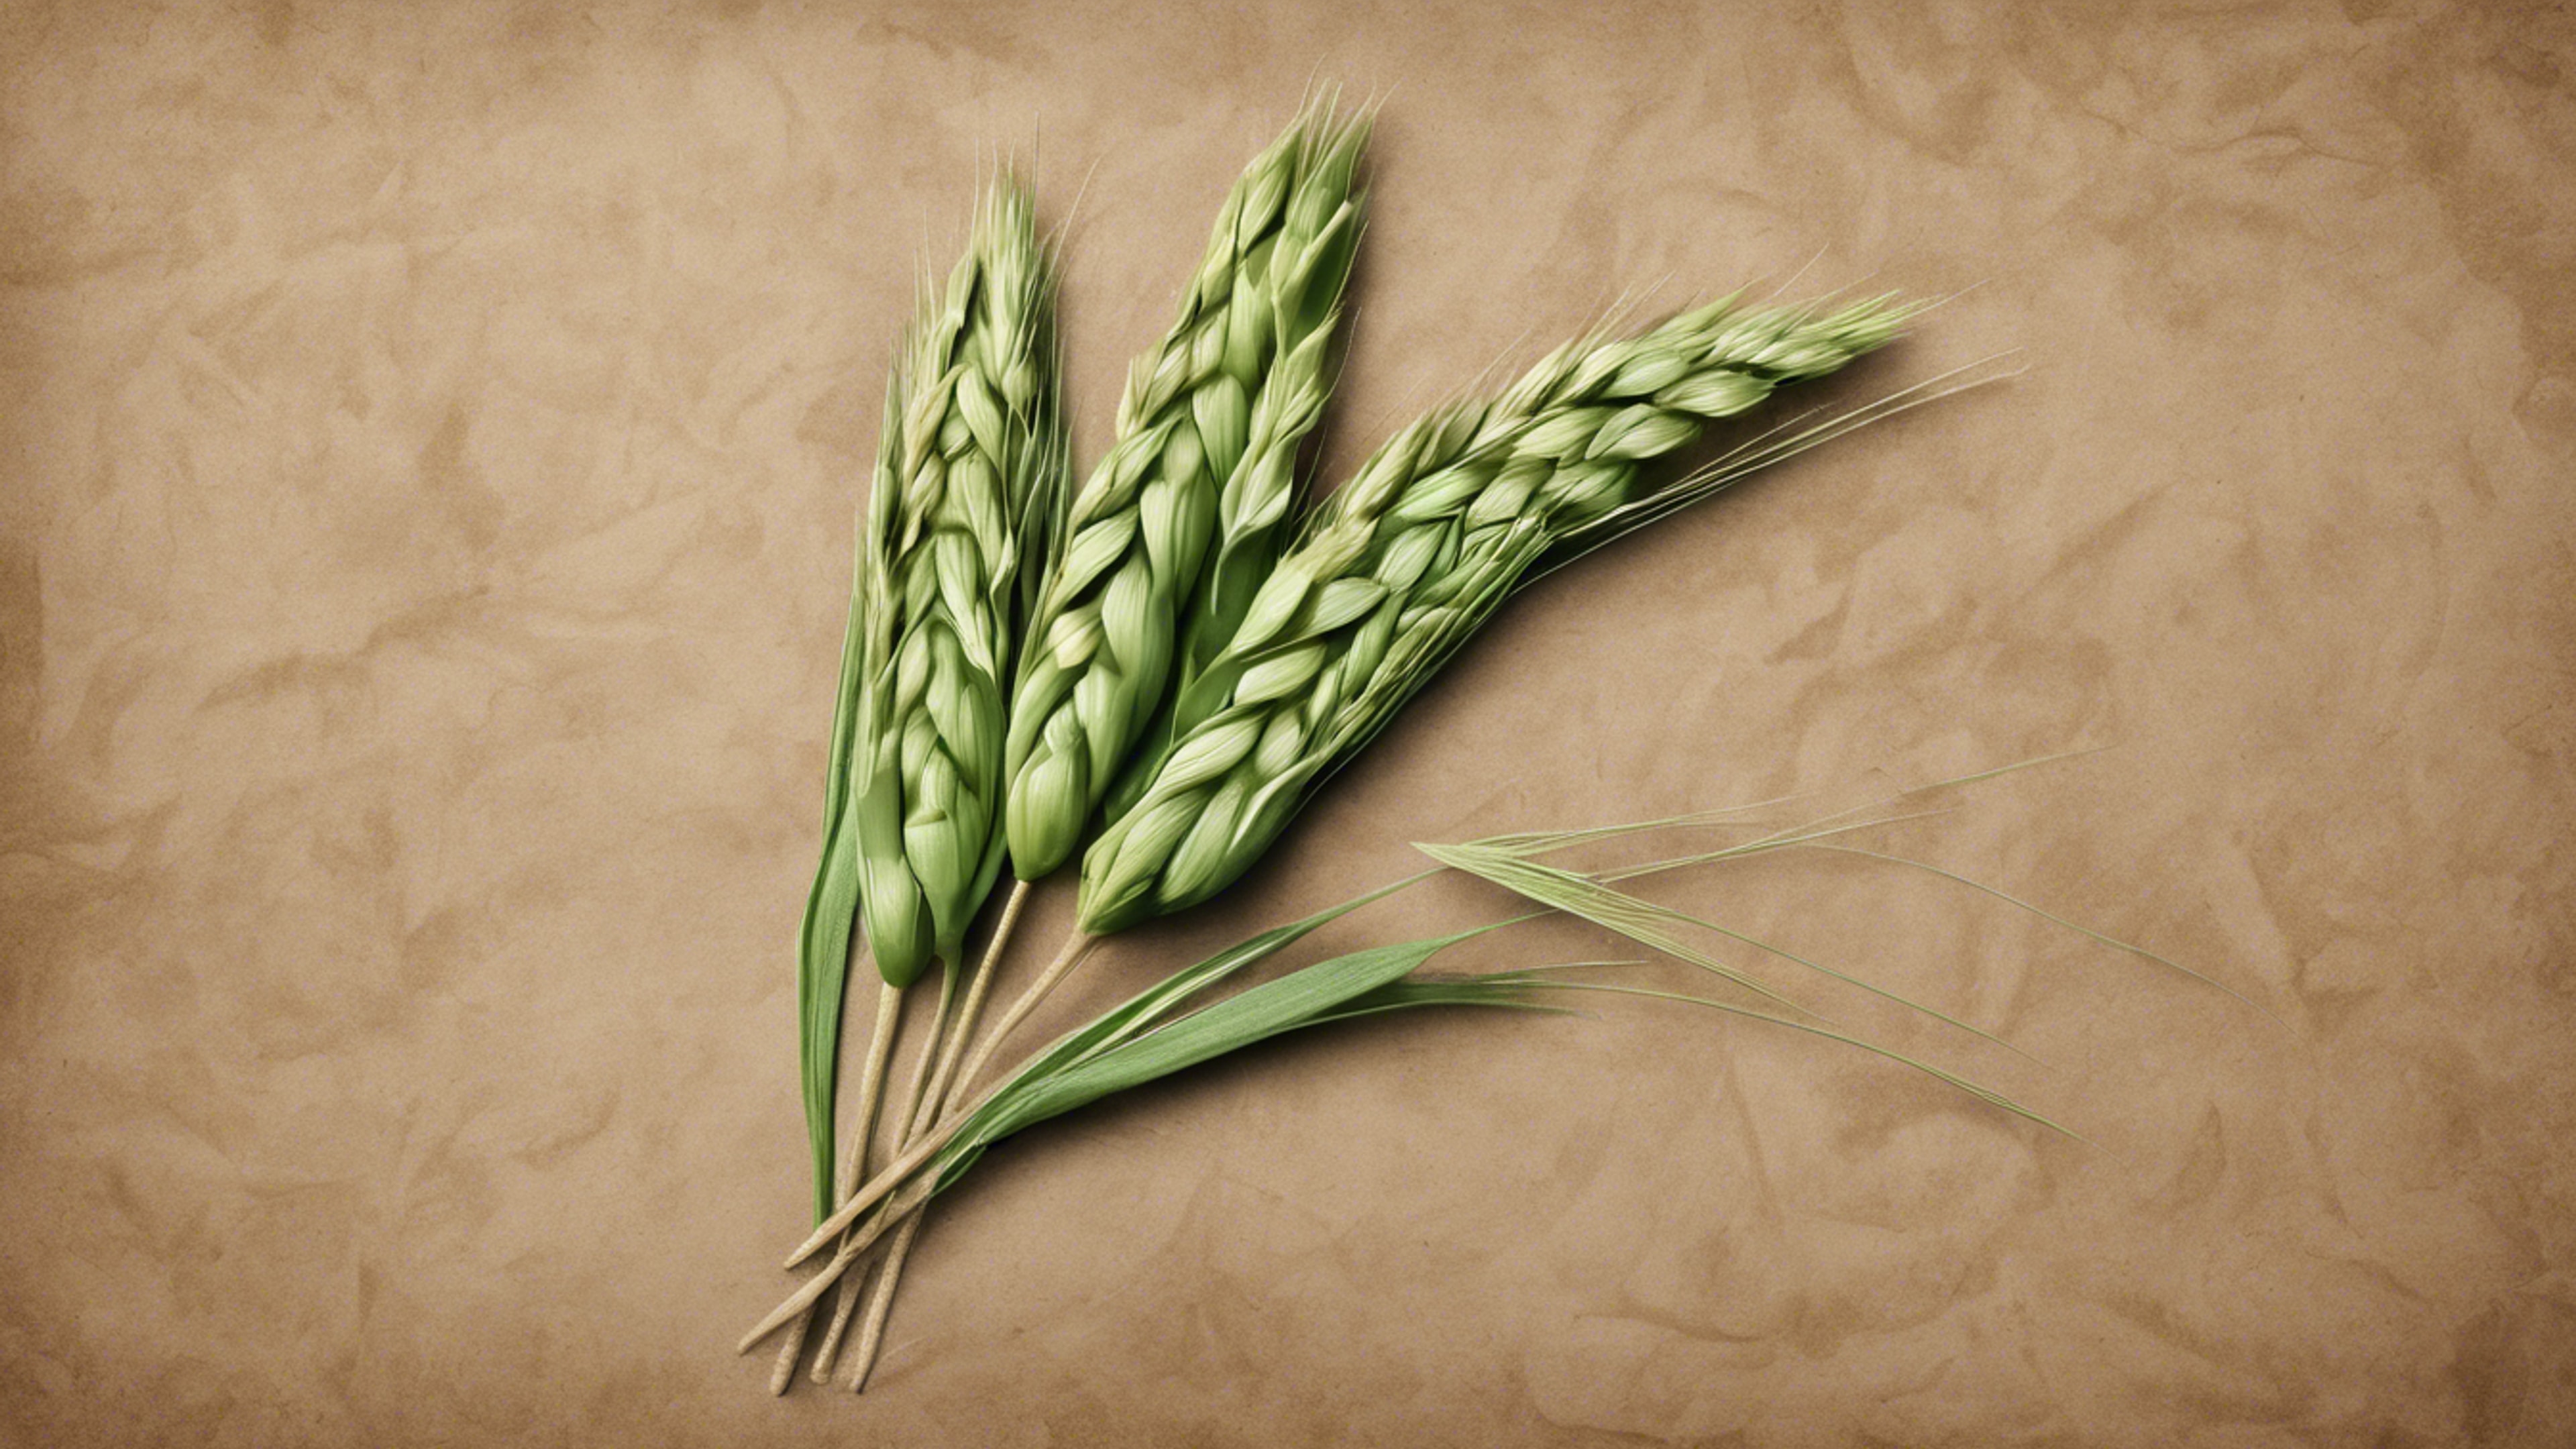 A detailed botanical illustration of a stalk of green wheat against an aged brown paper background.壁紙[958050ab552342b3bed0]